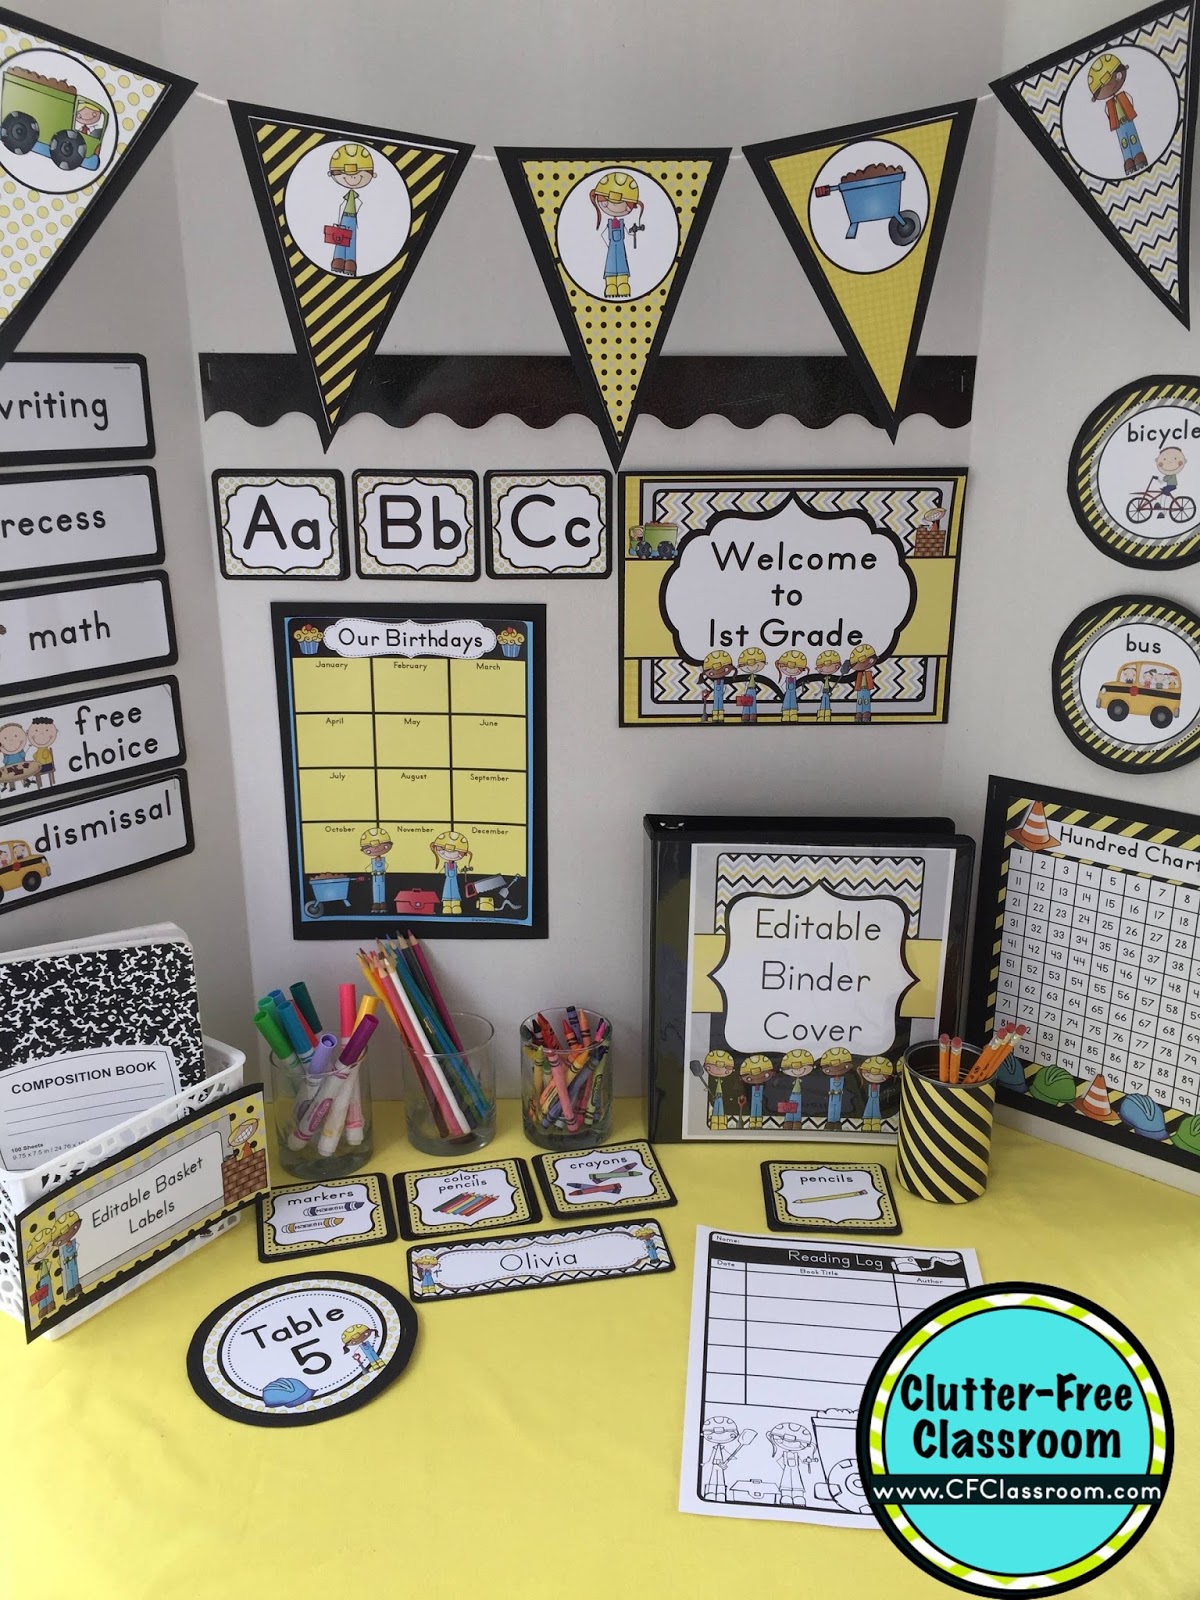 Are you planning a construction themed classroom or thematic unit? This blog post provides great decoration tips and ideas for the best a construction theme yet! It has photos, ideas, supplies & printable classroom decor to will make set up easy and affordable. You can create a construction theme on a budget!